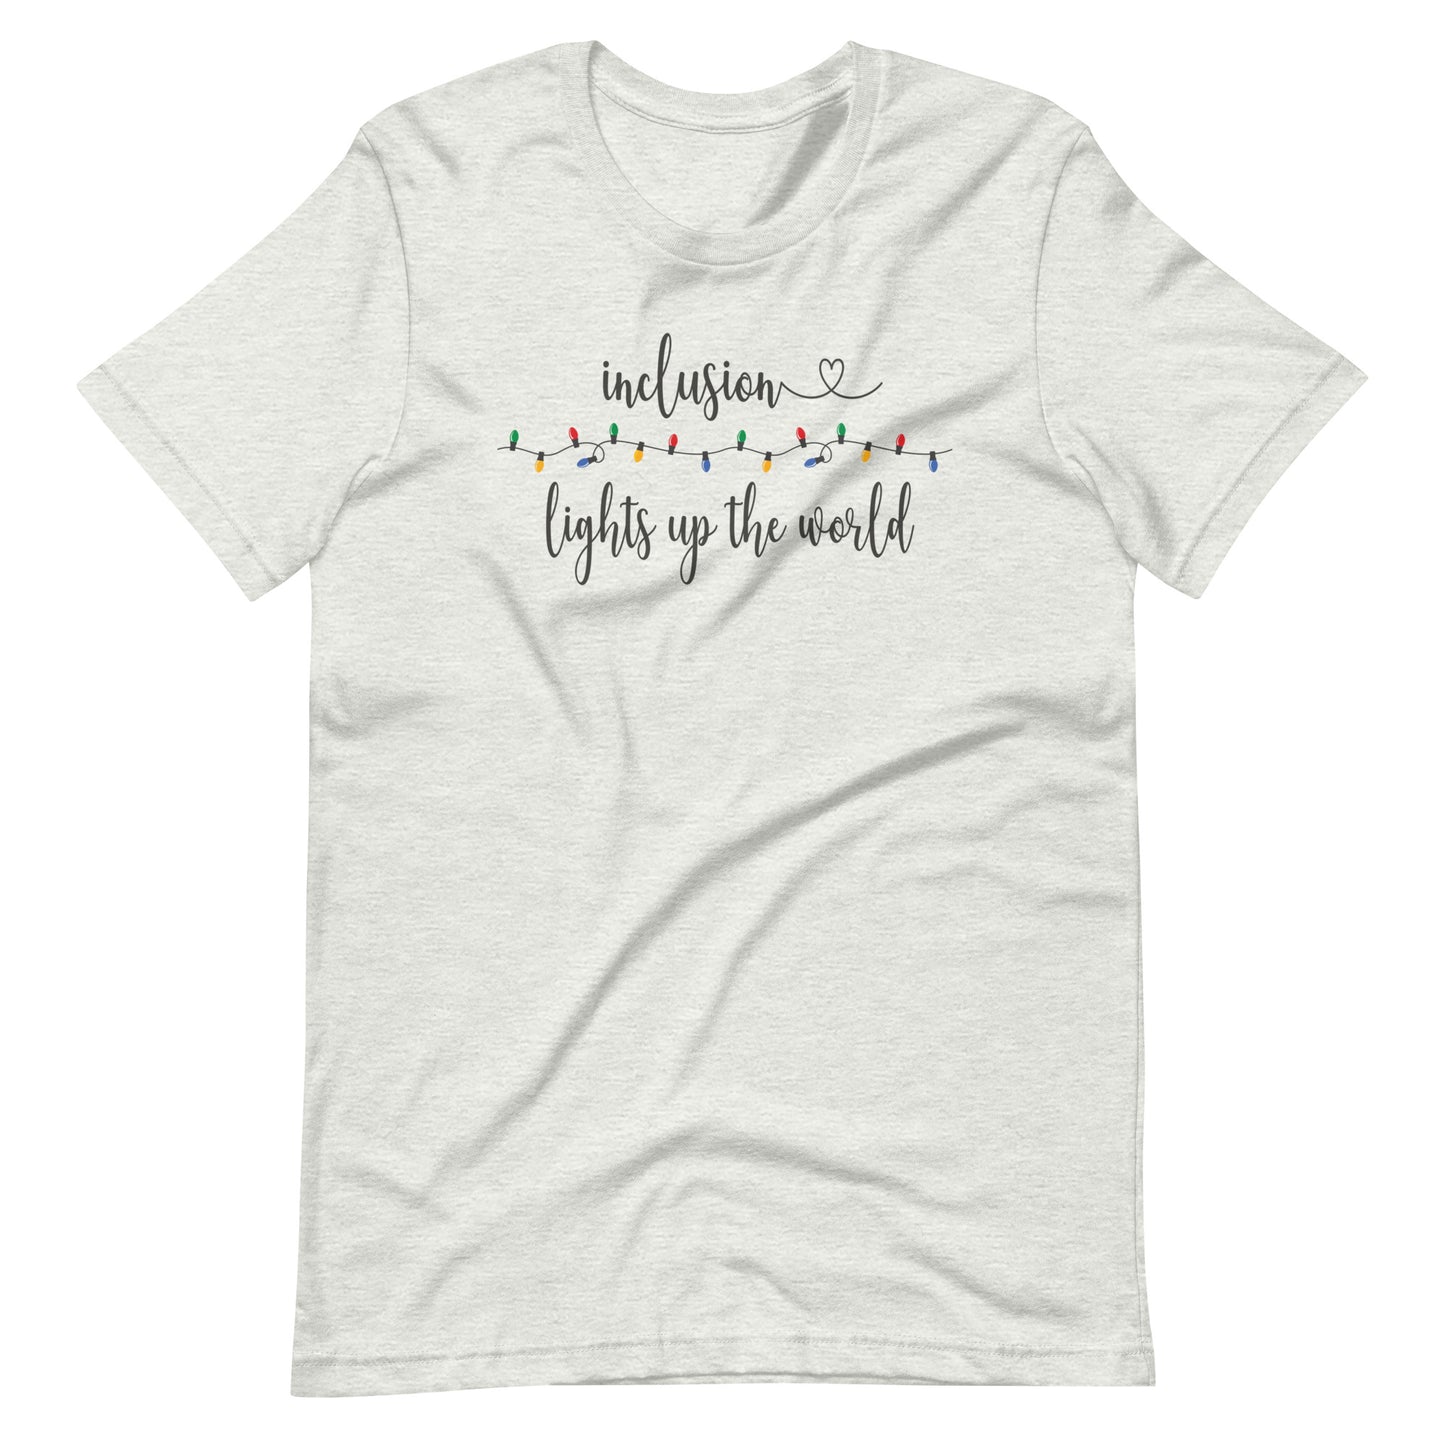 Inclusion Lights Up the World | Adult Unisex Tee